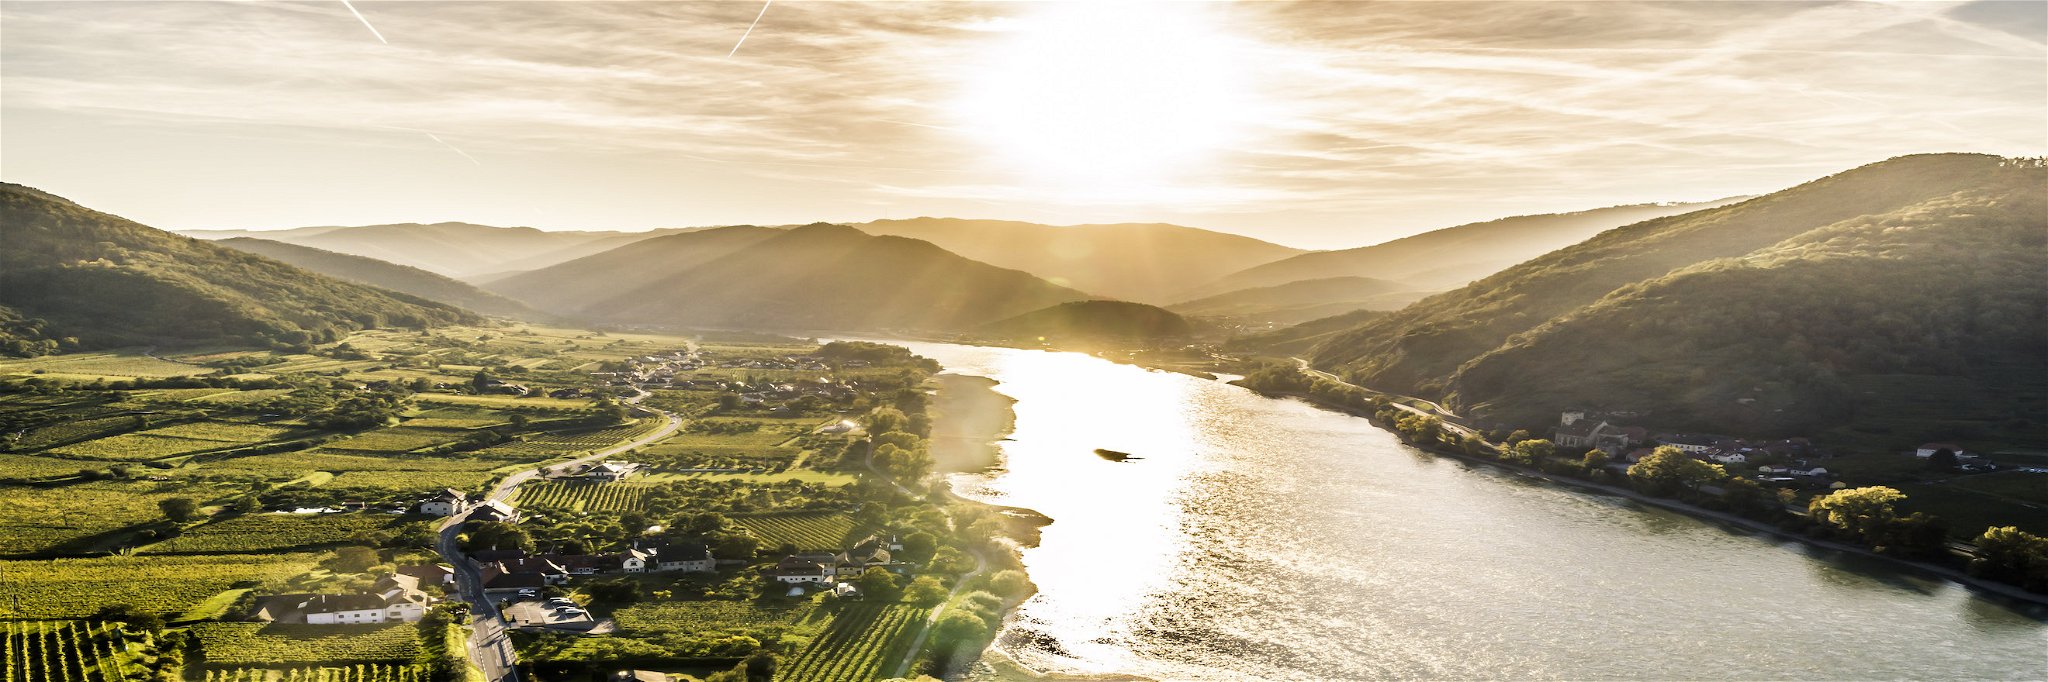 The Danube river and vineyards.